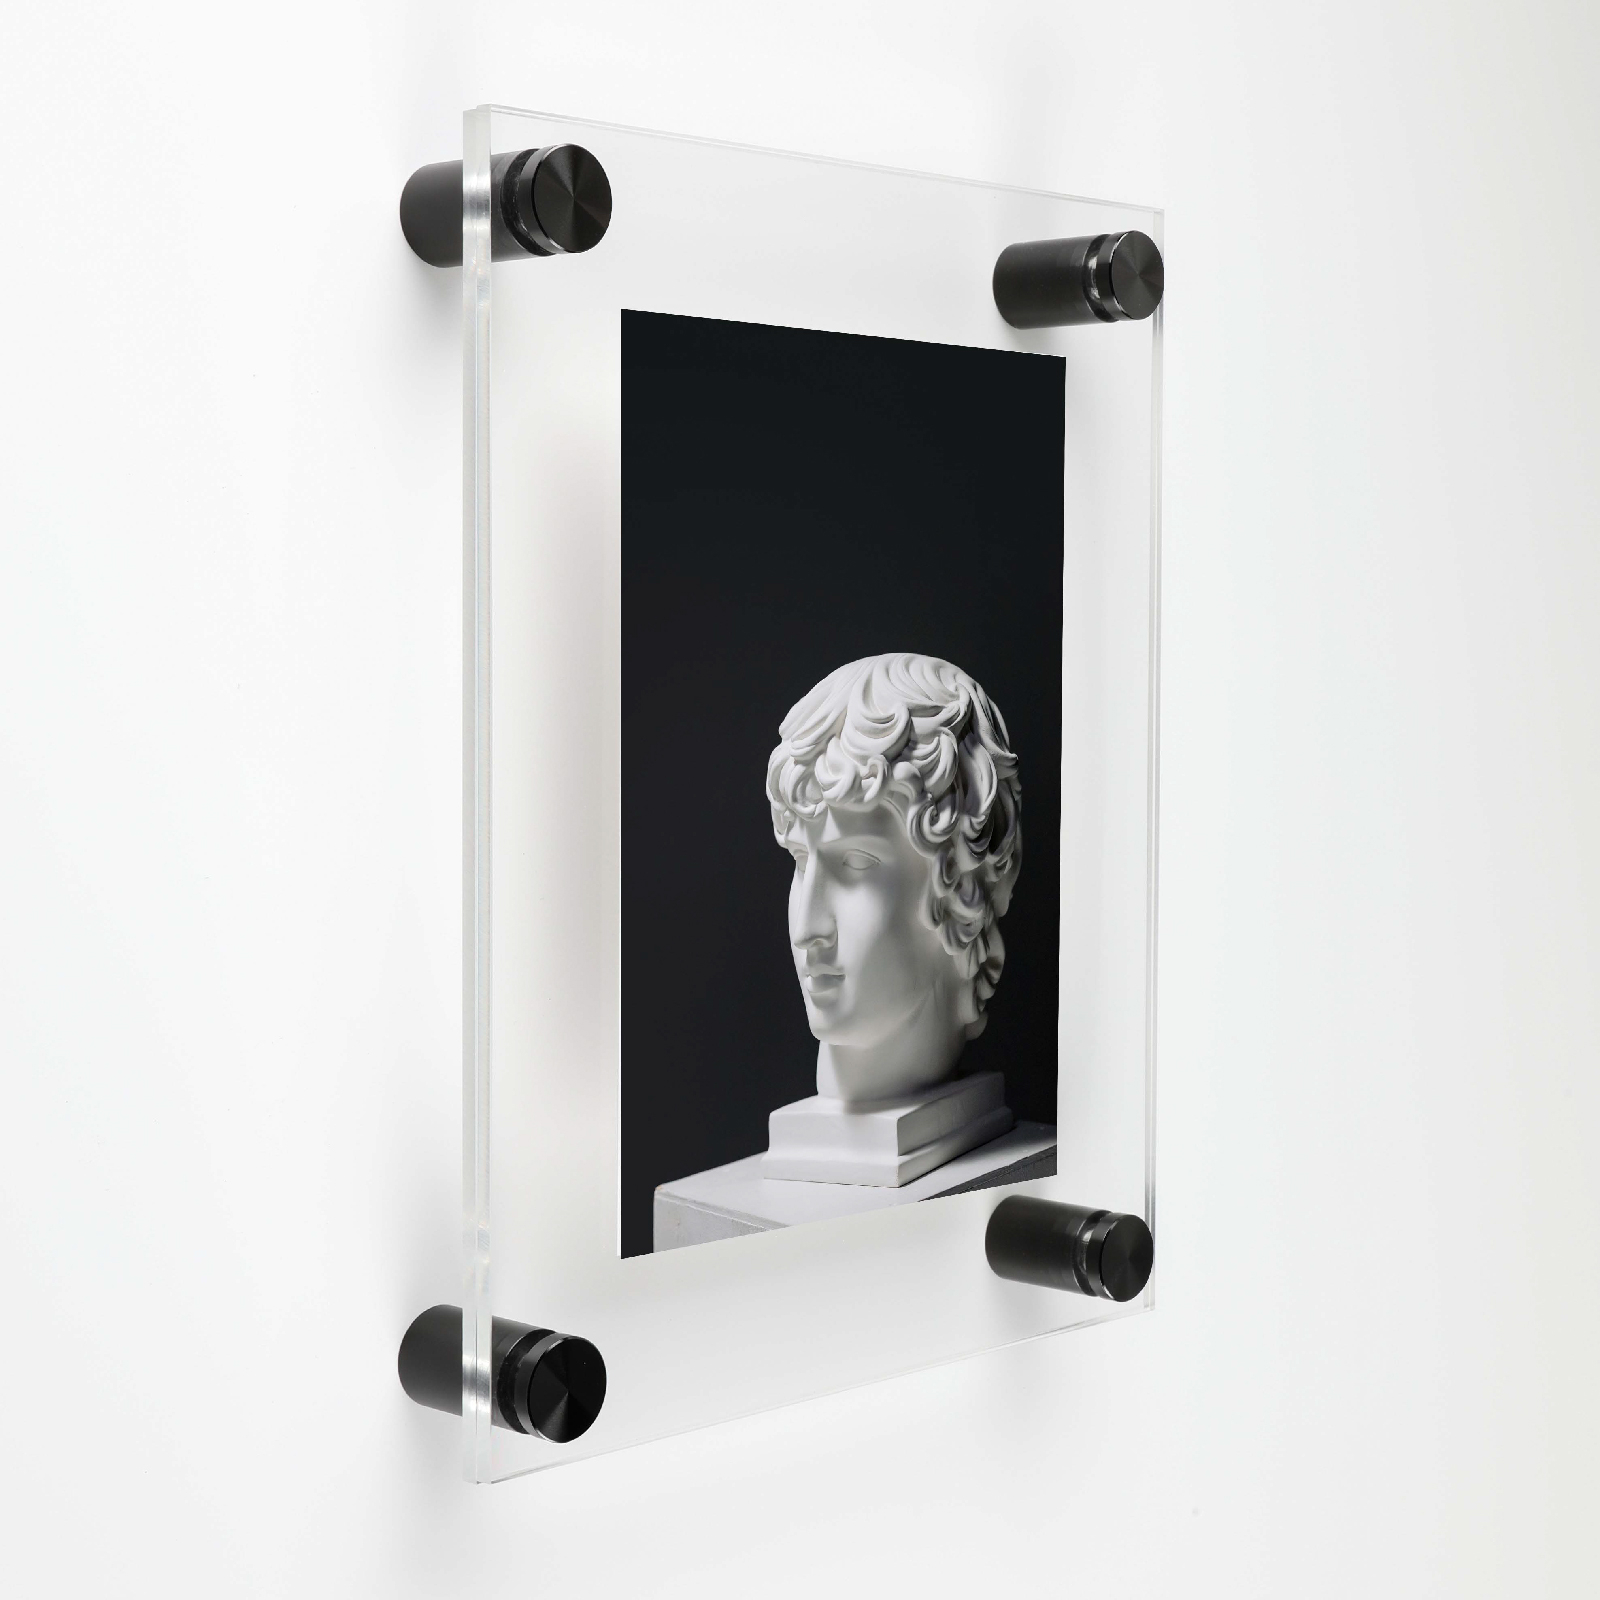 (2) 7-1/2'' X 9-1/2'' Clear Acrylics , Pre-Drilled With Polished Edges (Thick 1/8'' each), Wall Frame with (4) 5/8'' x 1'' Black Anodized Aluminum Standoffs includes Screws and Anchors